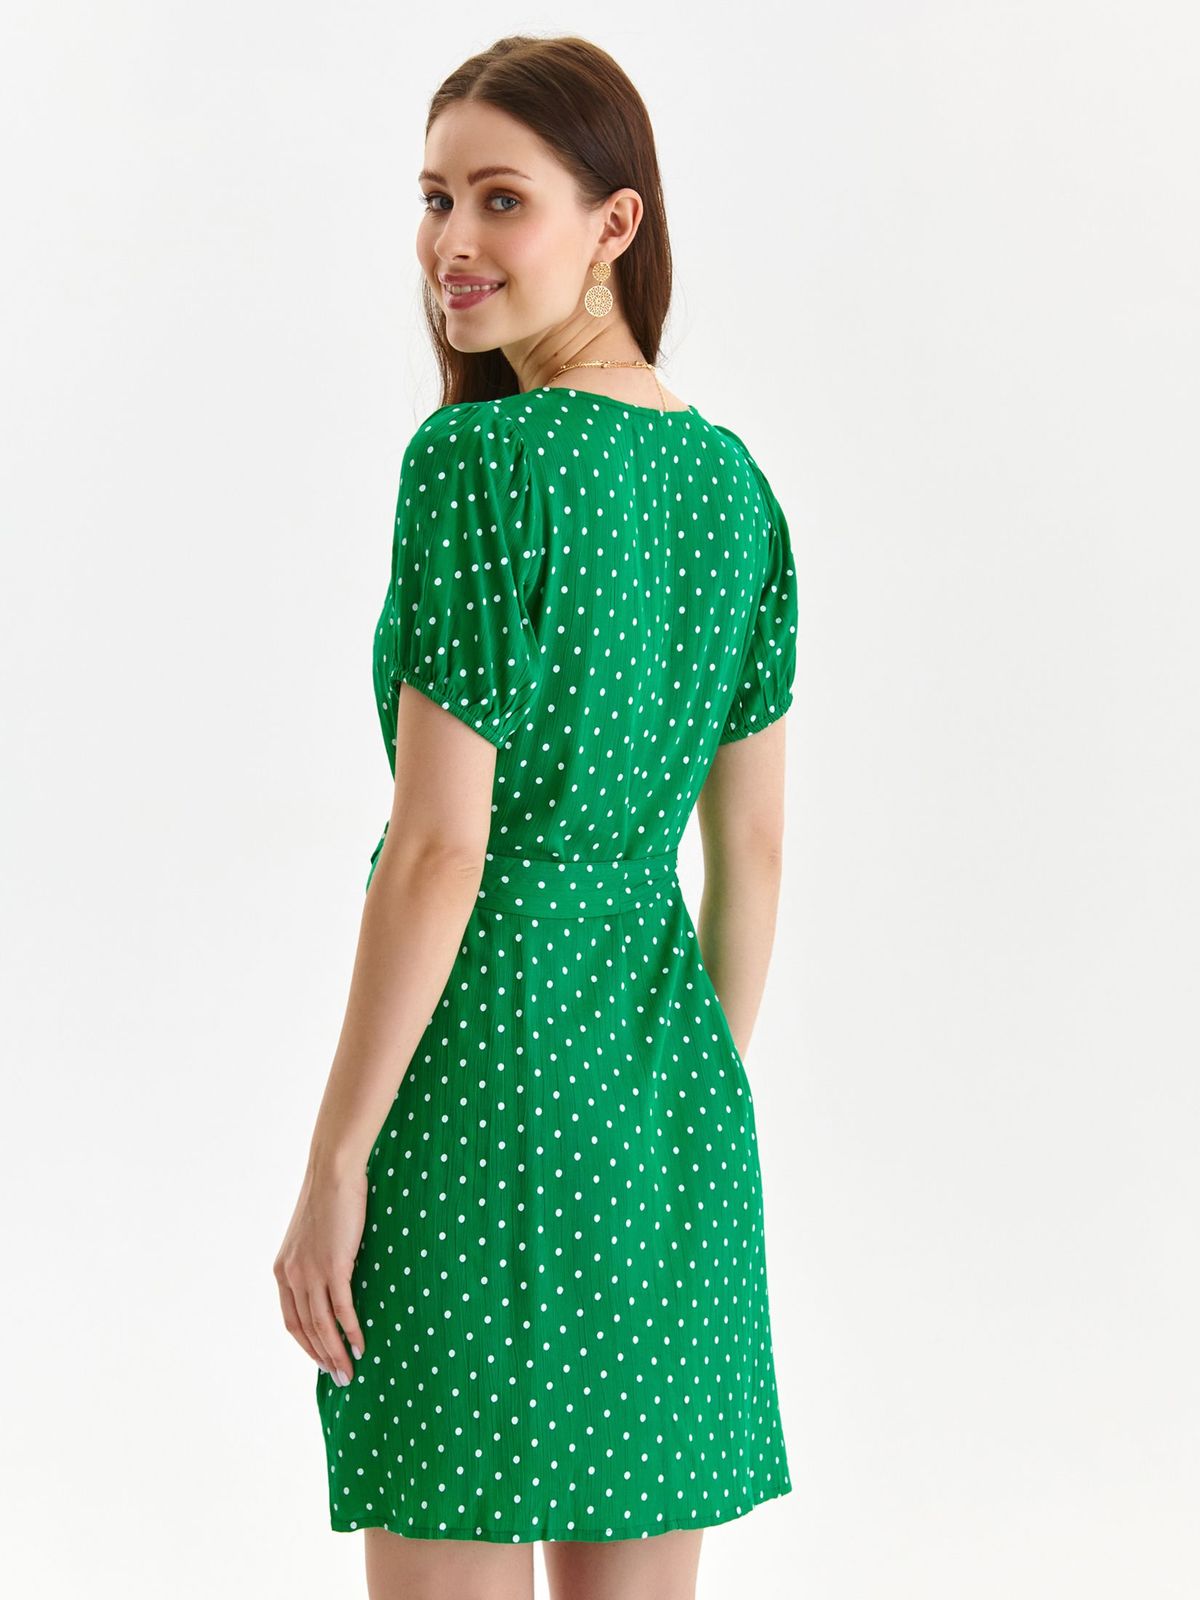 Green dress thin fabric short cut loose fit accessorized with tied waistband with puffed sleeves 3 - StarShinerS.com